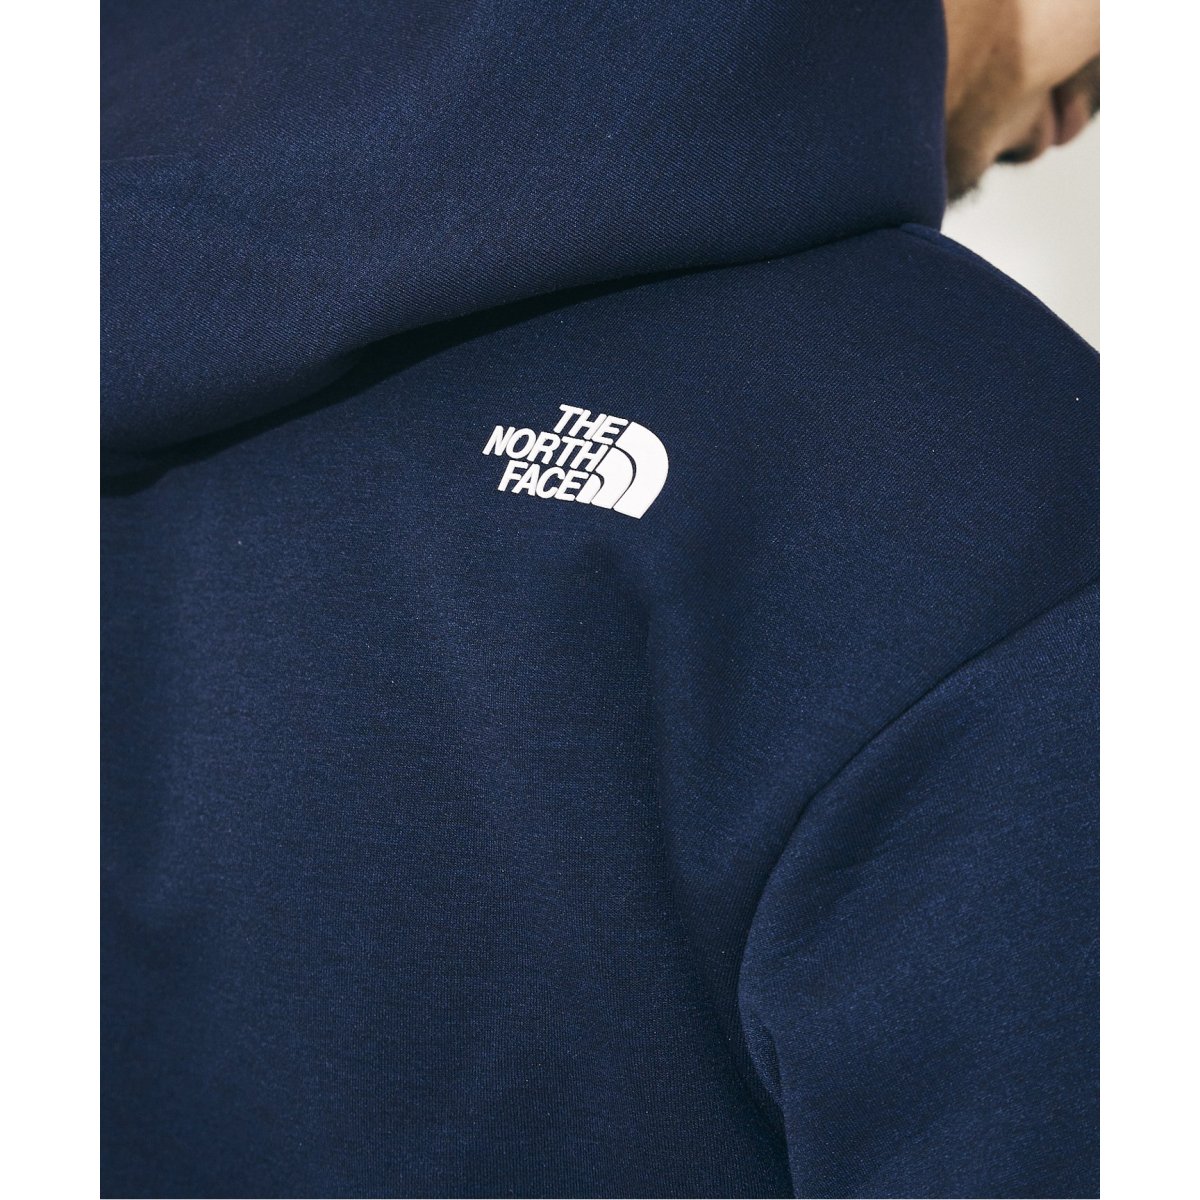 THE NORTH FACE/ ザノースフェイス】Tech Air Sweat Wide Hood ...